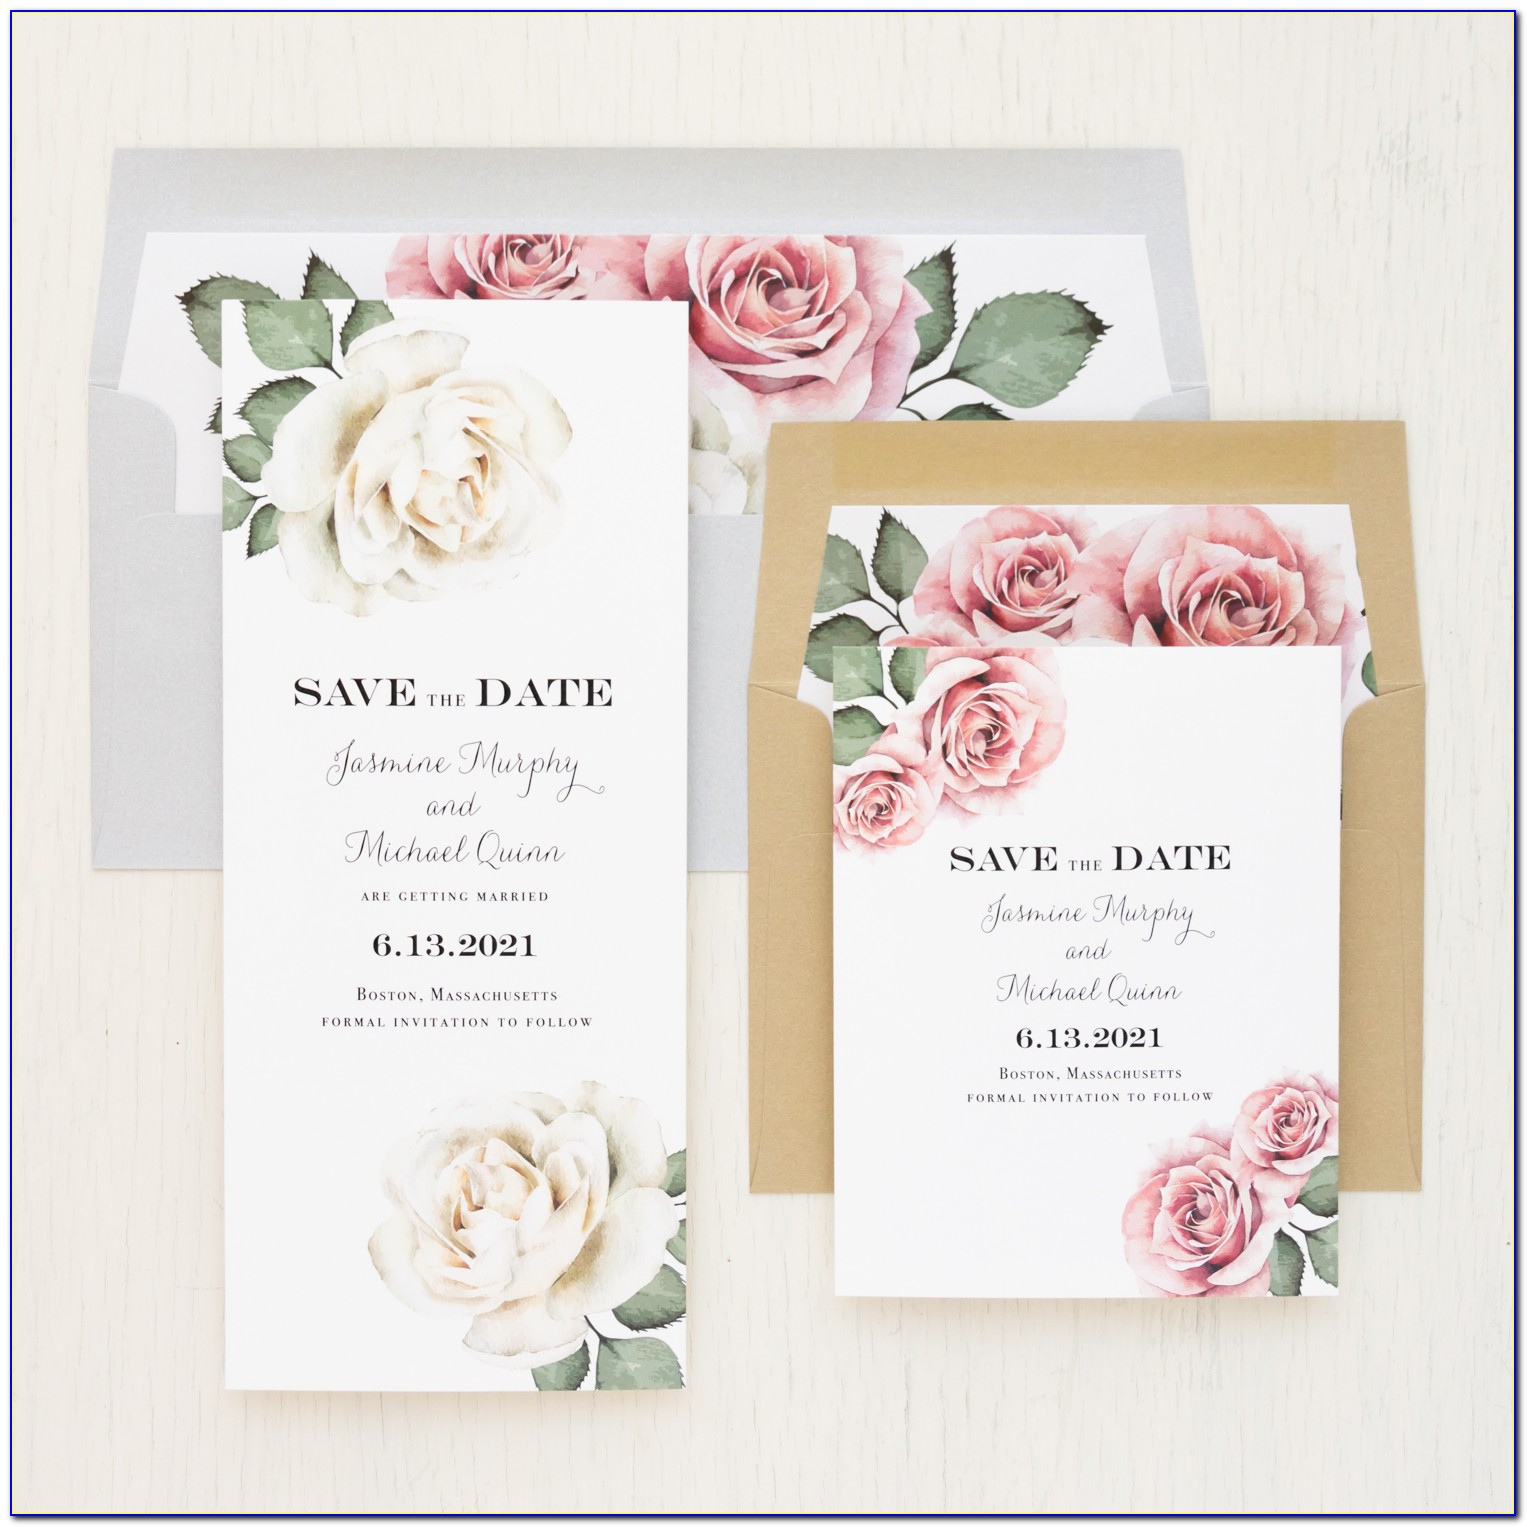 Save The Date Wedding Invitations Email